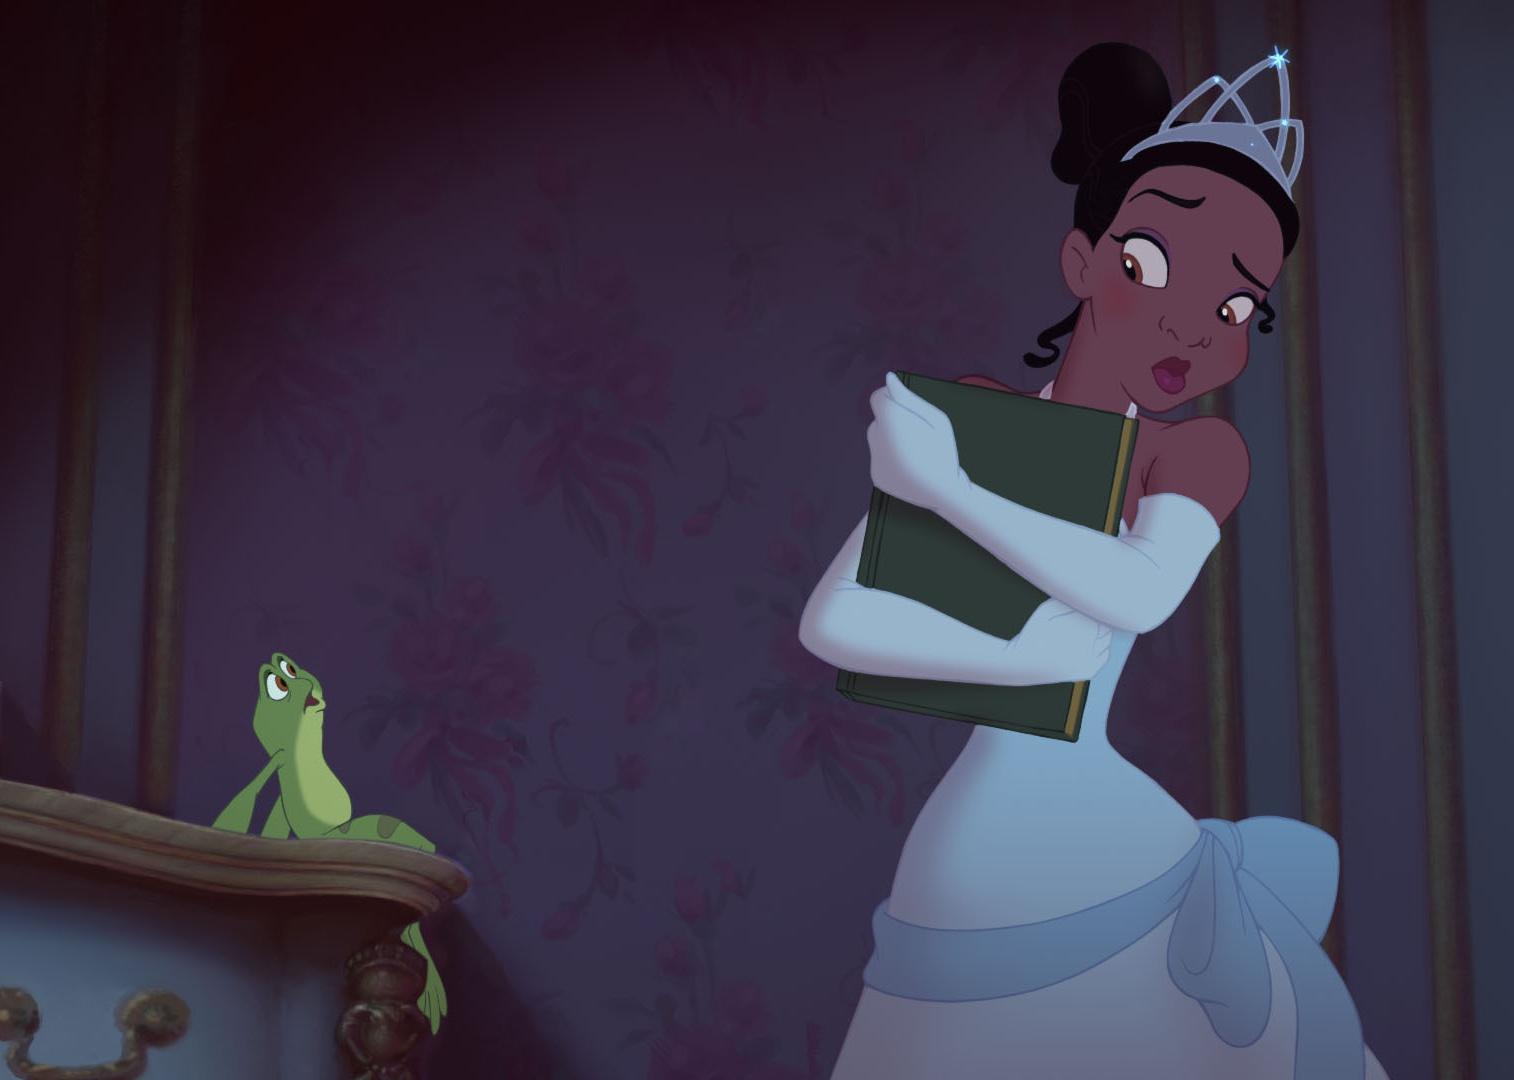 A princess in a white gown holding a book and looking at a frog.